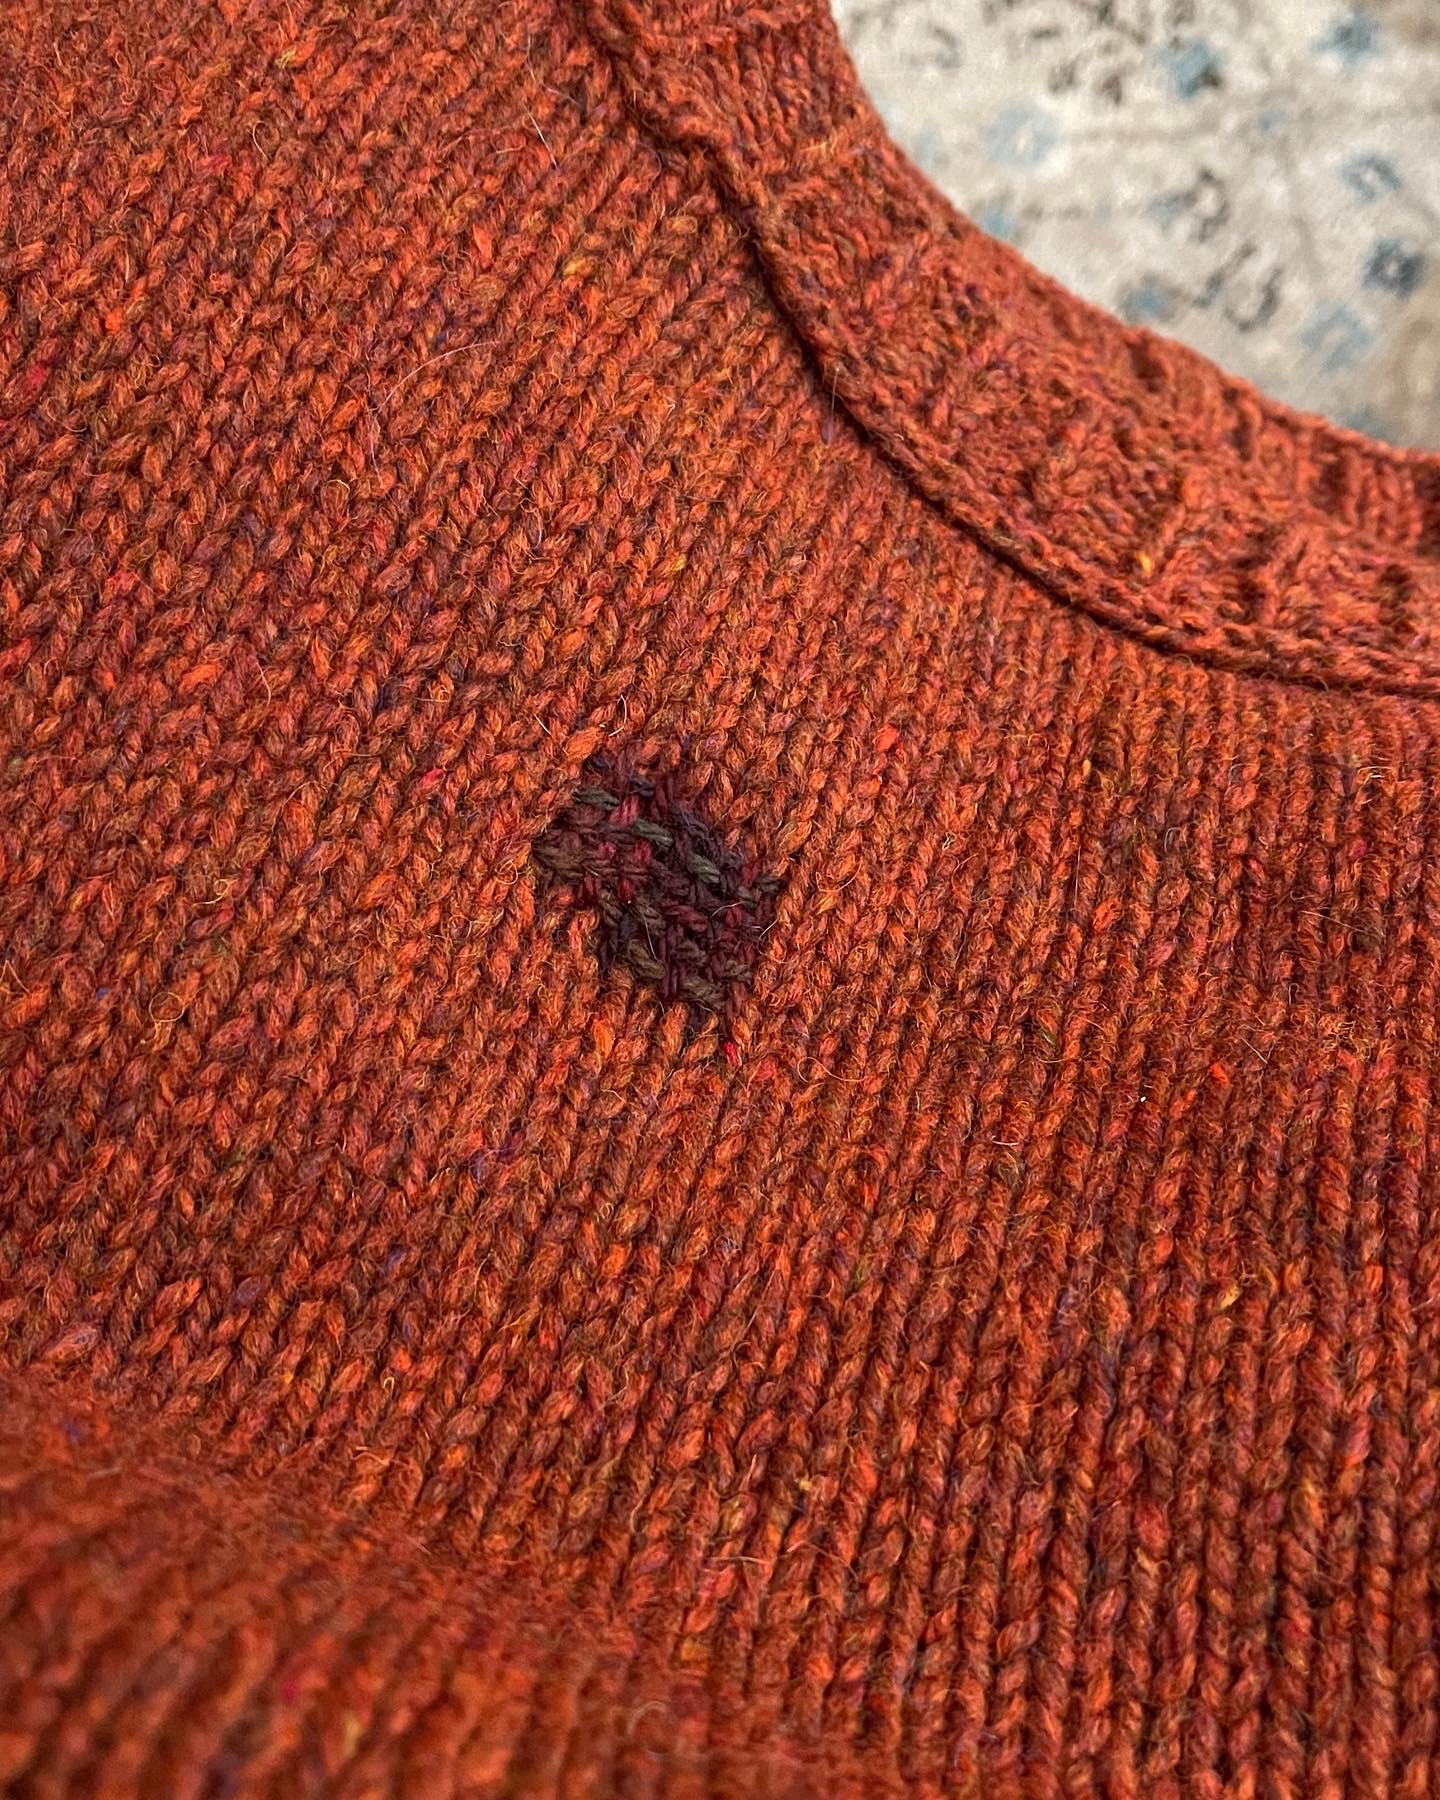 Visible Mending with a Darning Loom